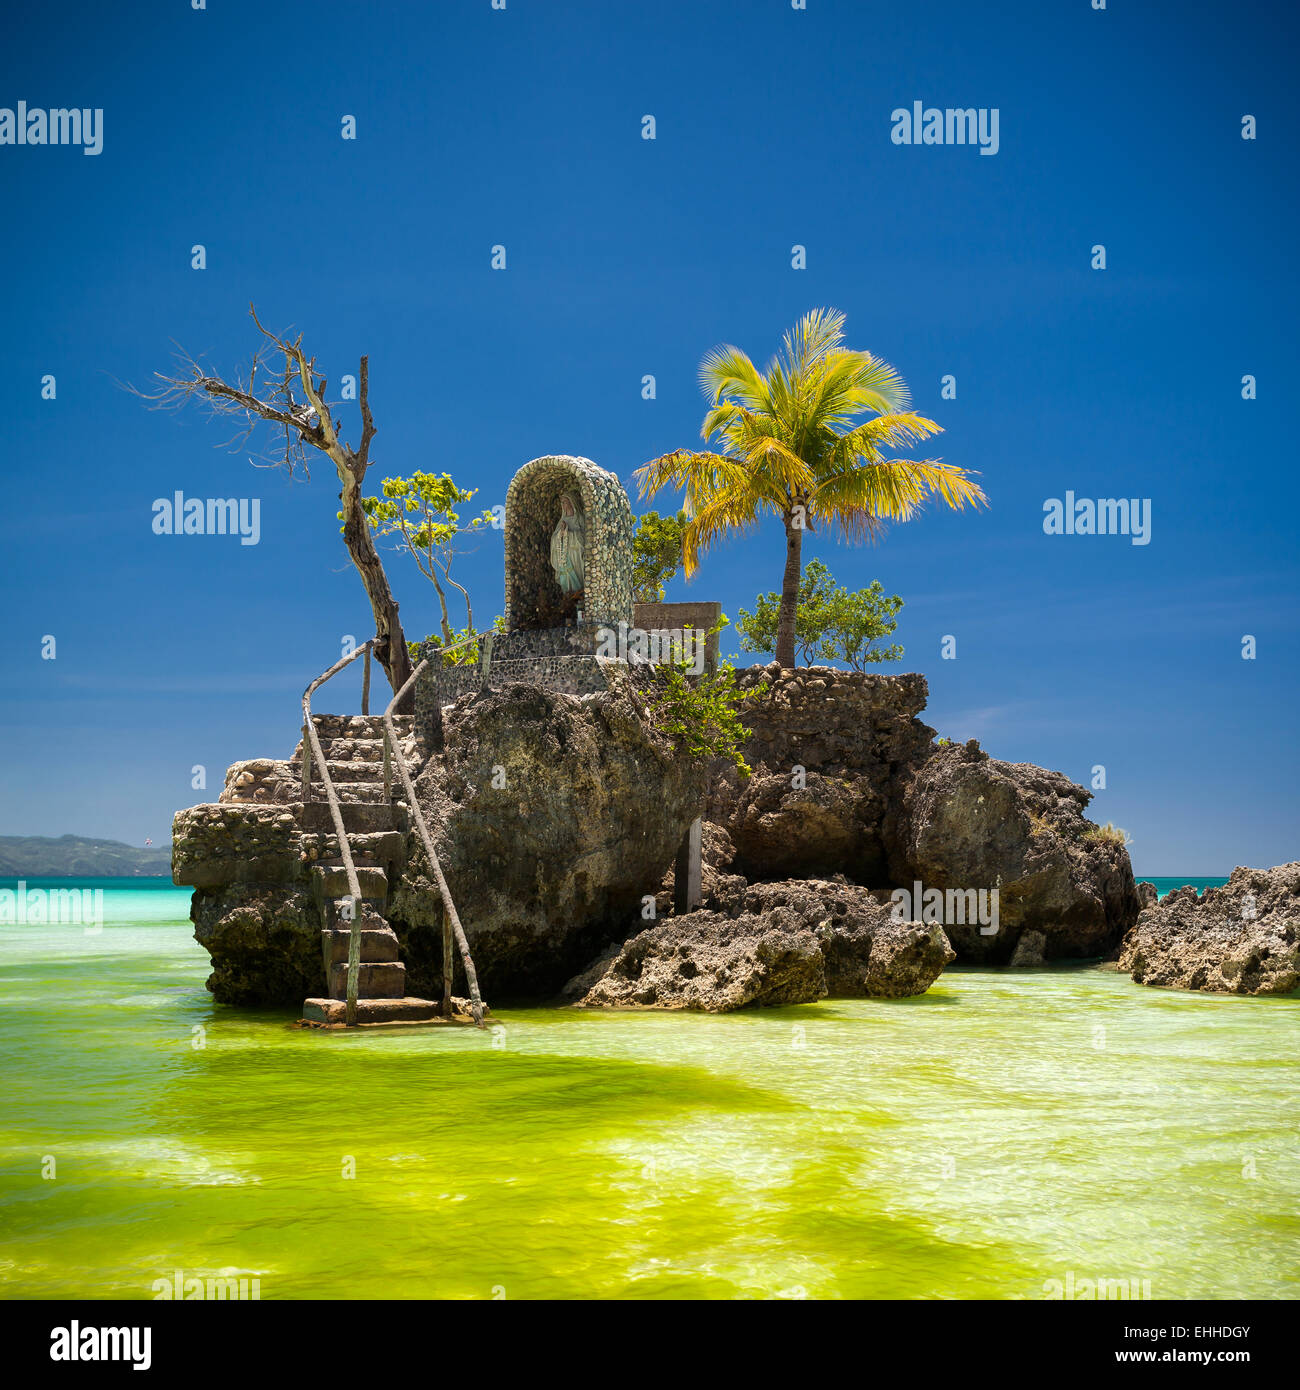 Willy's rock on island Boracay, Philippines. Boat Station One, White beach place. Stock Photo